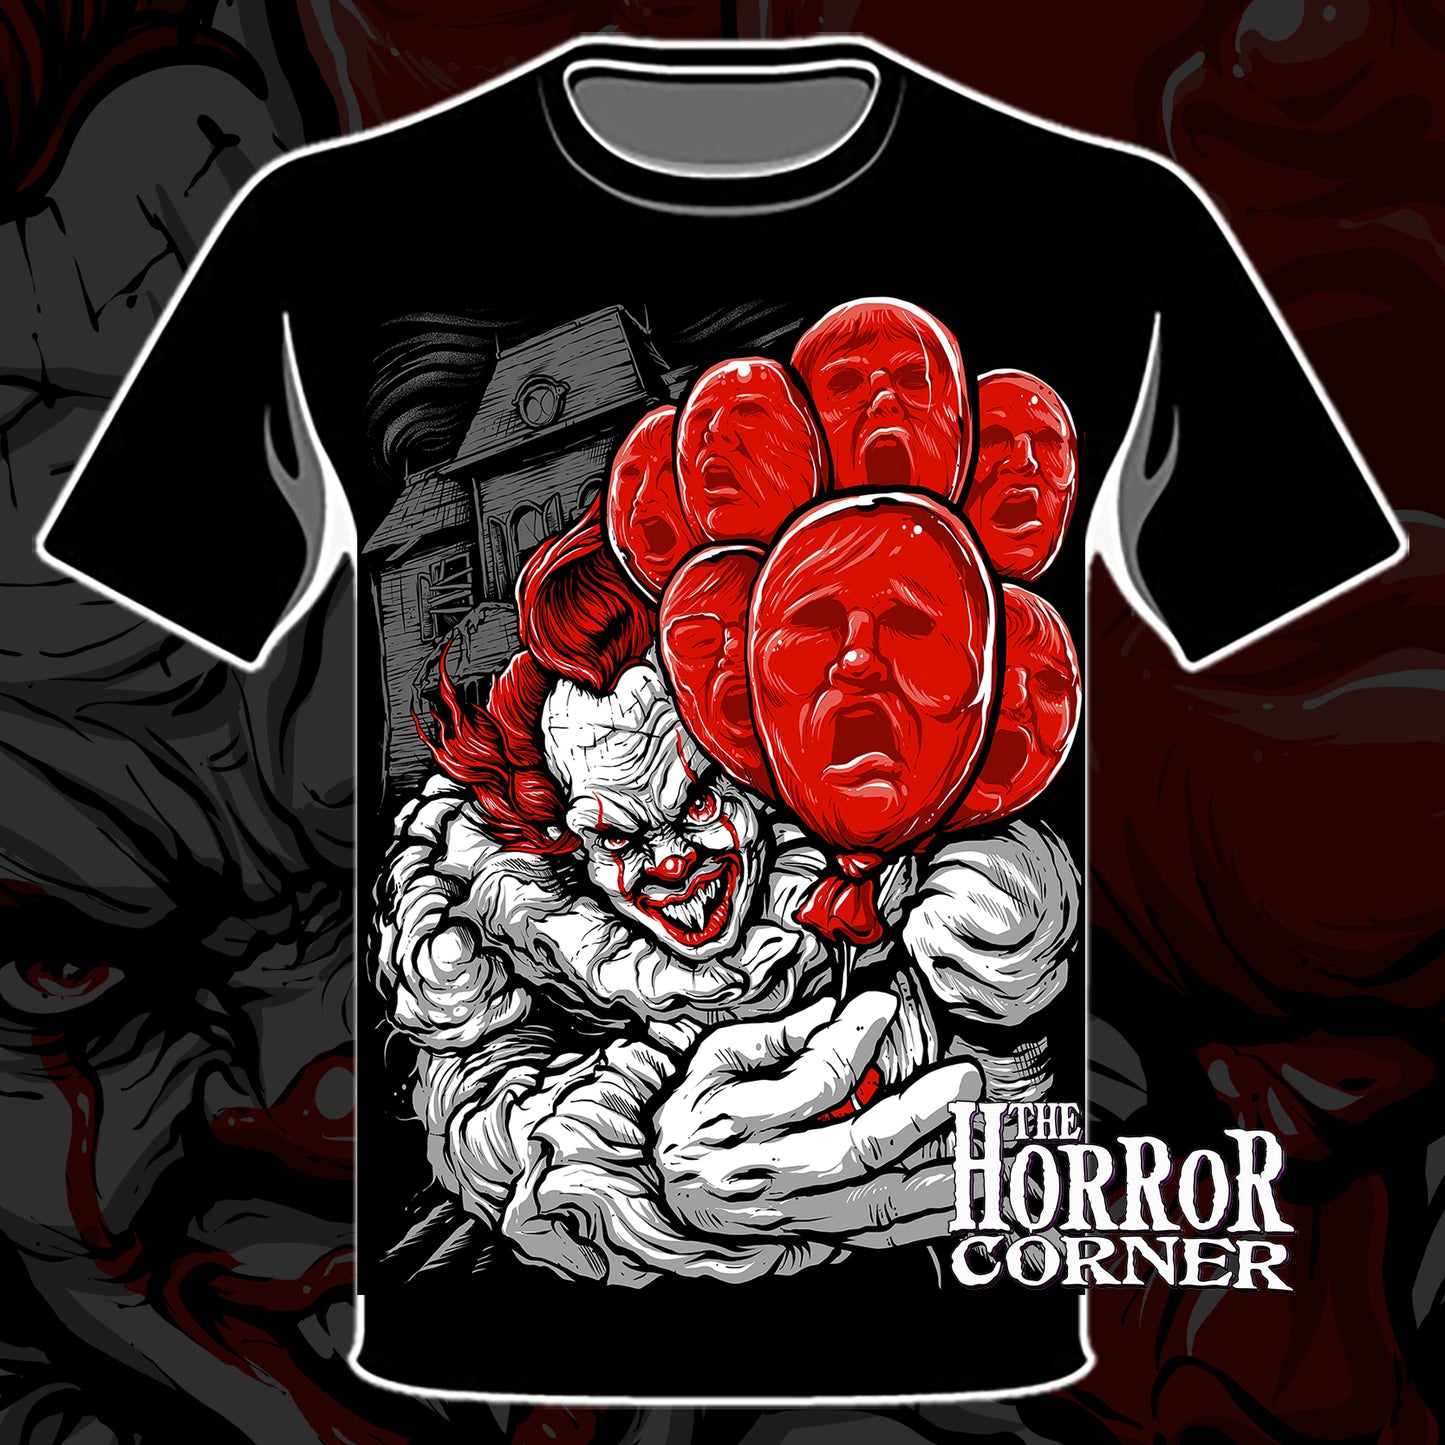 Tormented - deluxe t-shirt